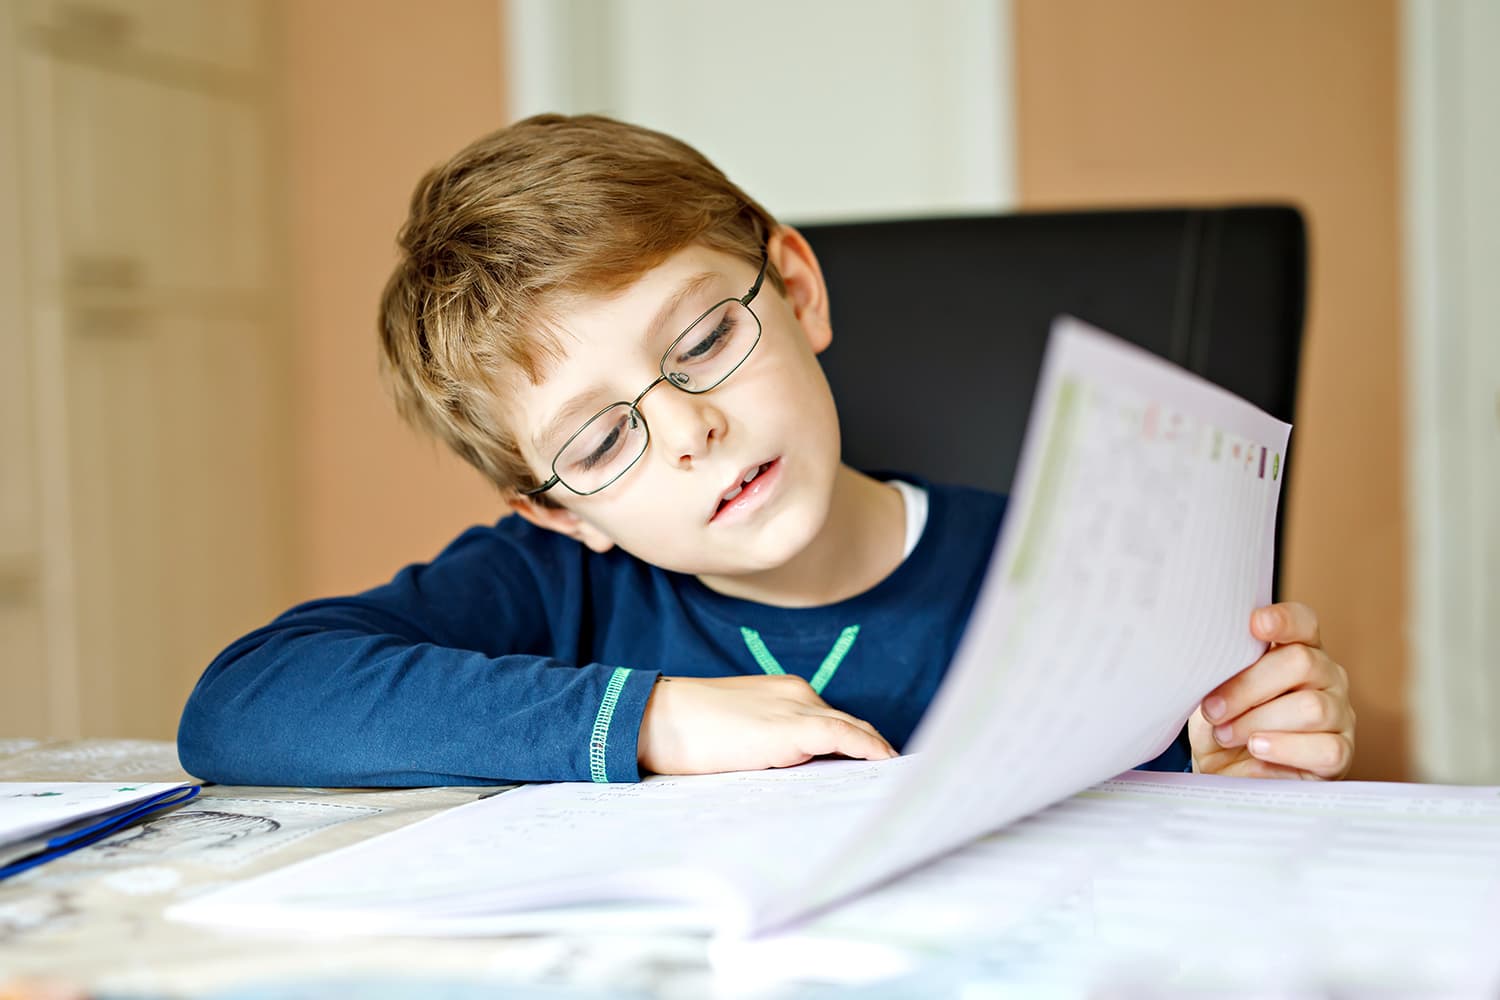 child with glasses sitting at desk doing school work